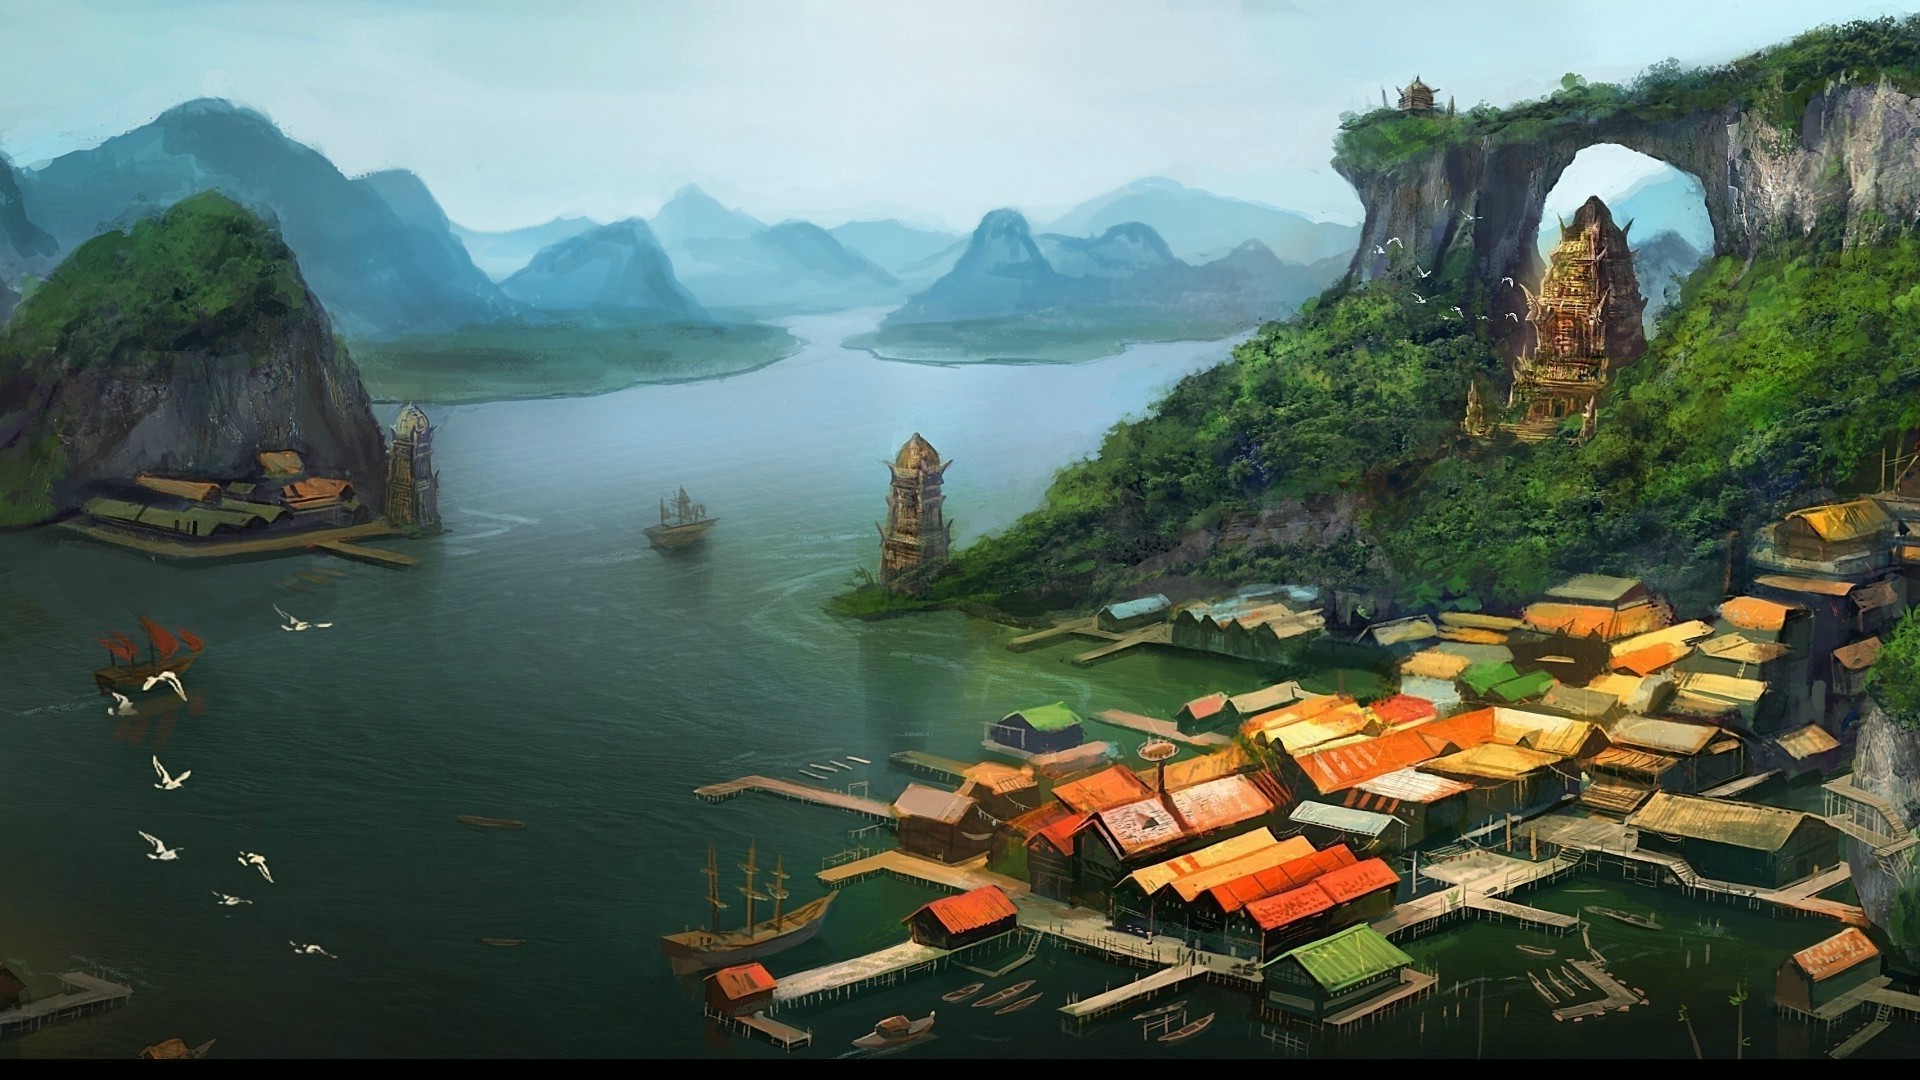 anime nature wallpaper,natural landscape,nature,strategy video game,pc game,fjord